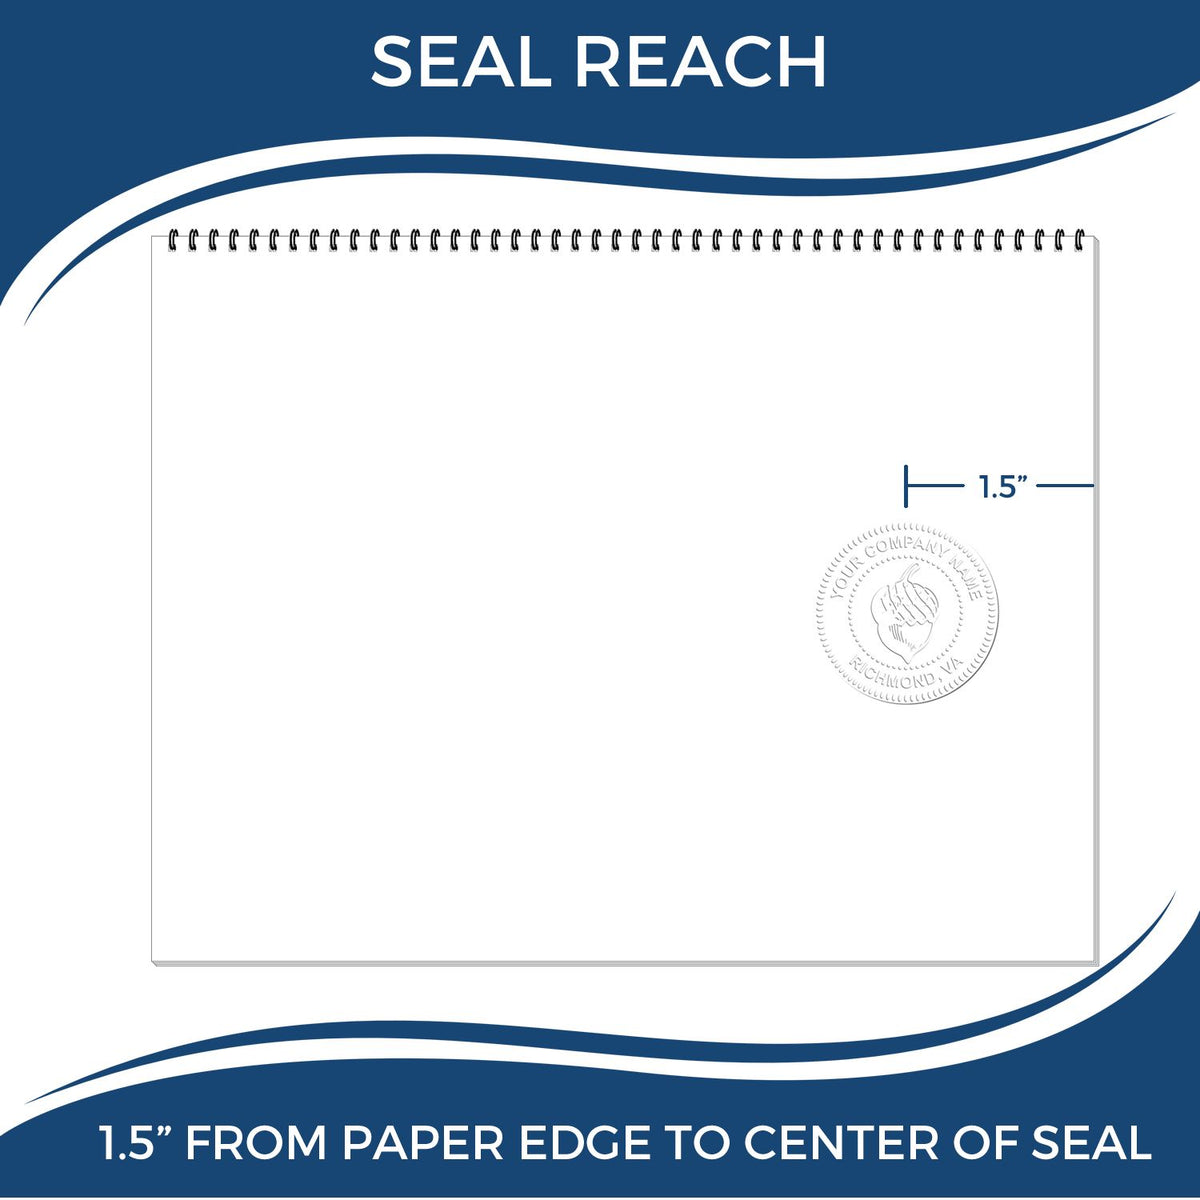 An infographic showing the seal reach which is represented by a ruler and a miniature seal image of the Hybrid Oklahoma Engineer Seal